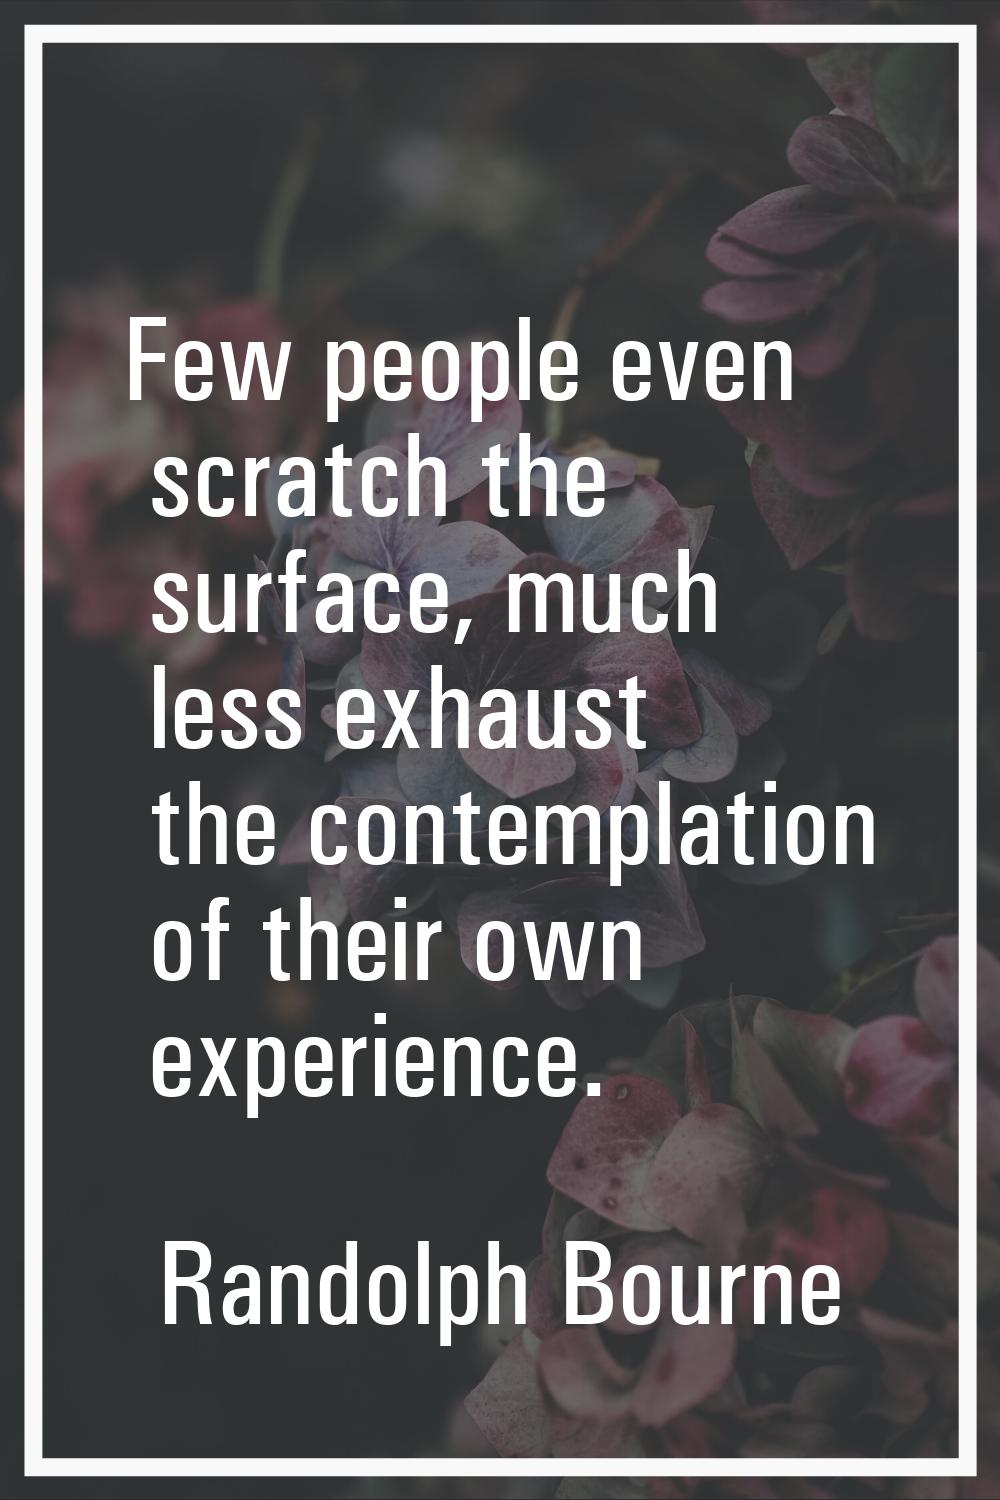 Few people even scratch the surface, much less exhaust the contemplation of their own experience.